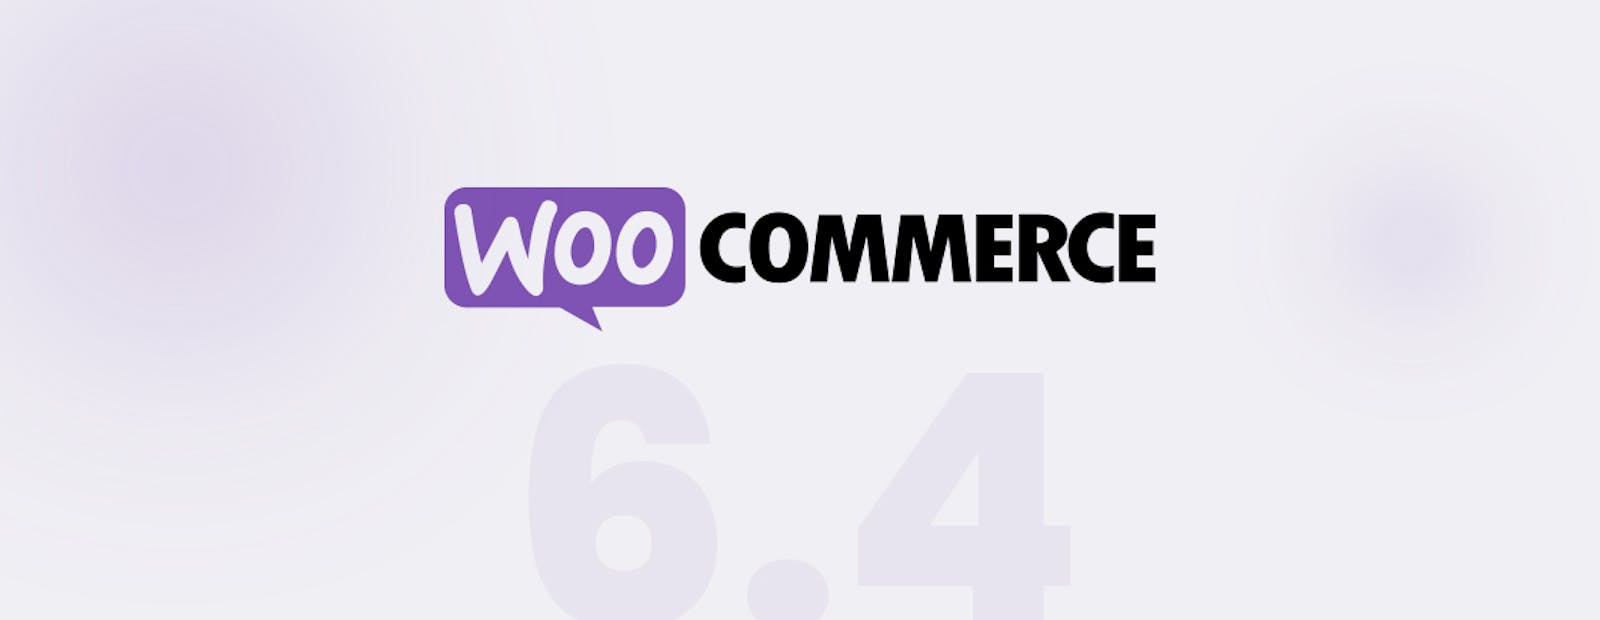 WooCommerce 6.4 & What’s New in It?